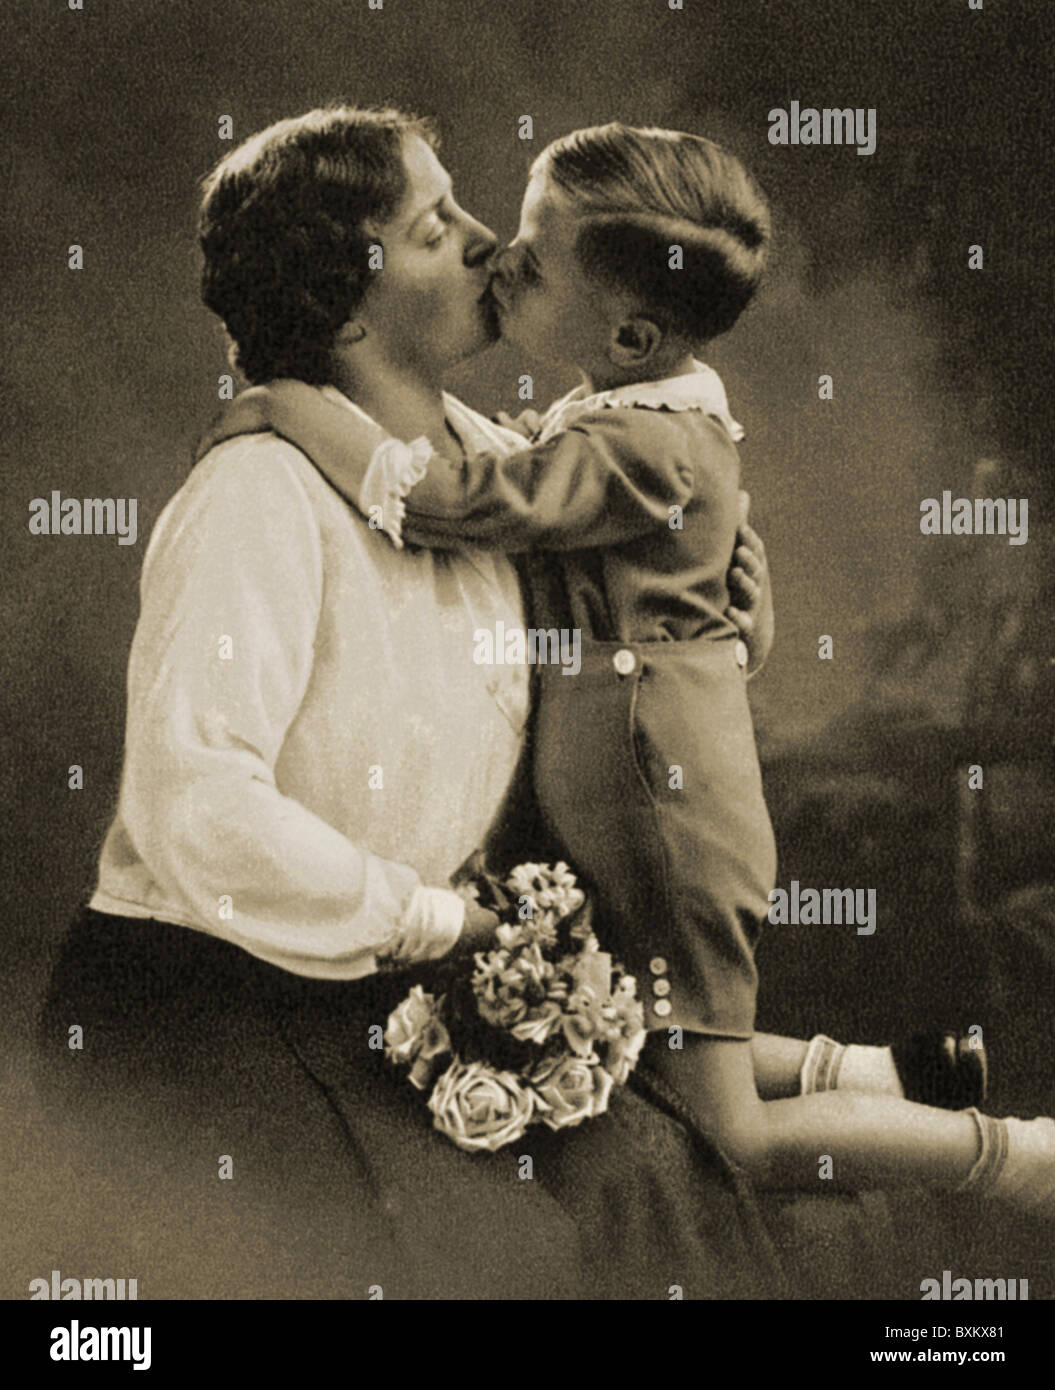 People Woman With Child Boy Is Kissing His Mother On Mother S Day Stock Photo Alamy